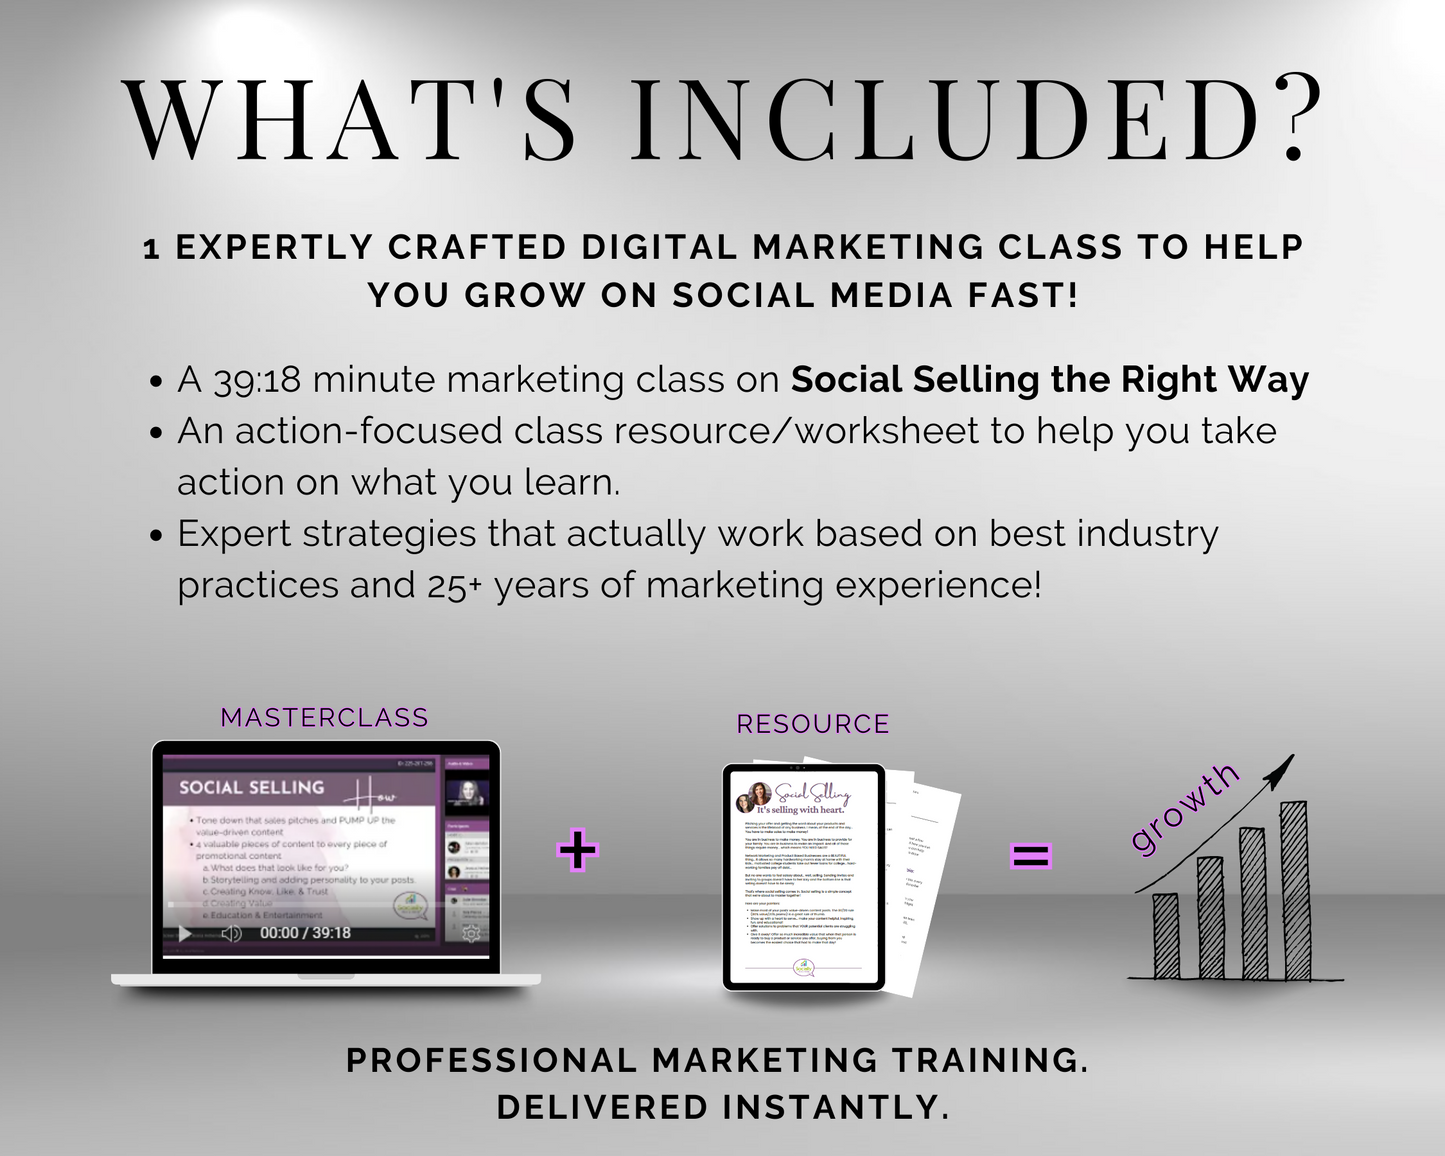 What's included in the digital marketing class? The TAT - Social Selling the Right Way Masterclass description is missing. Please provide the Get Socially Inclined product description.